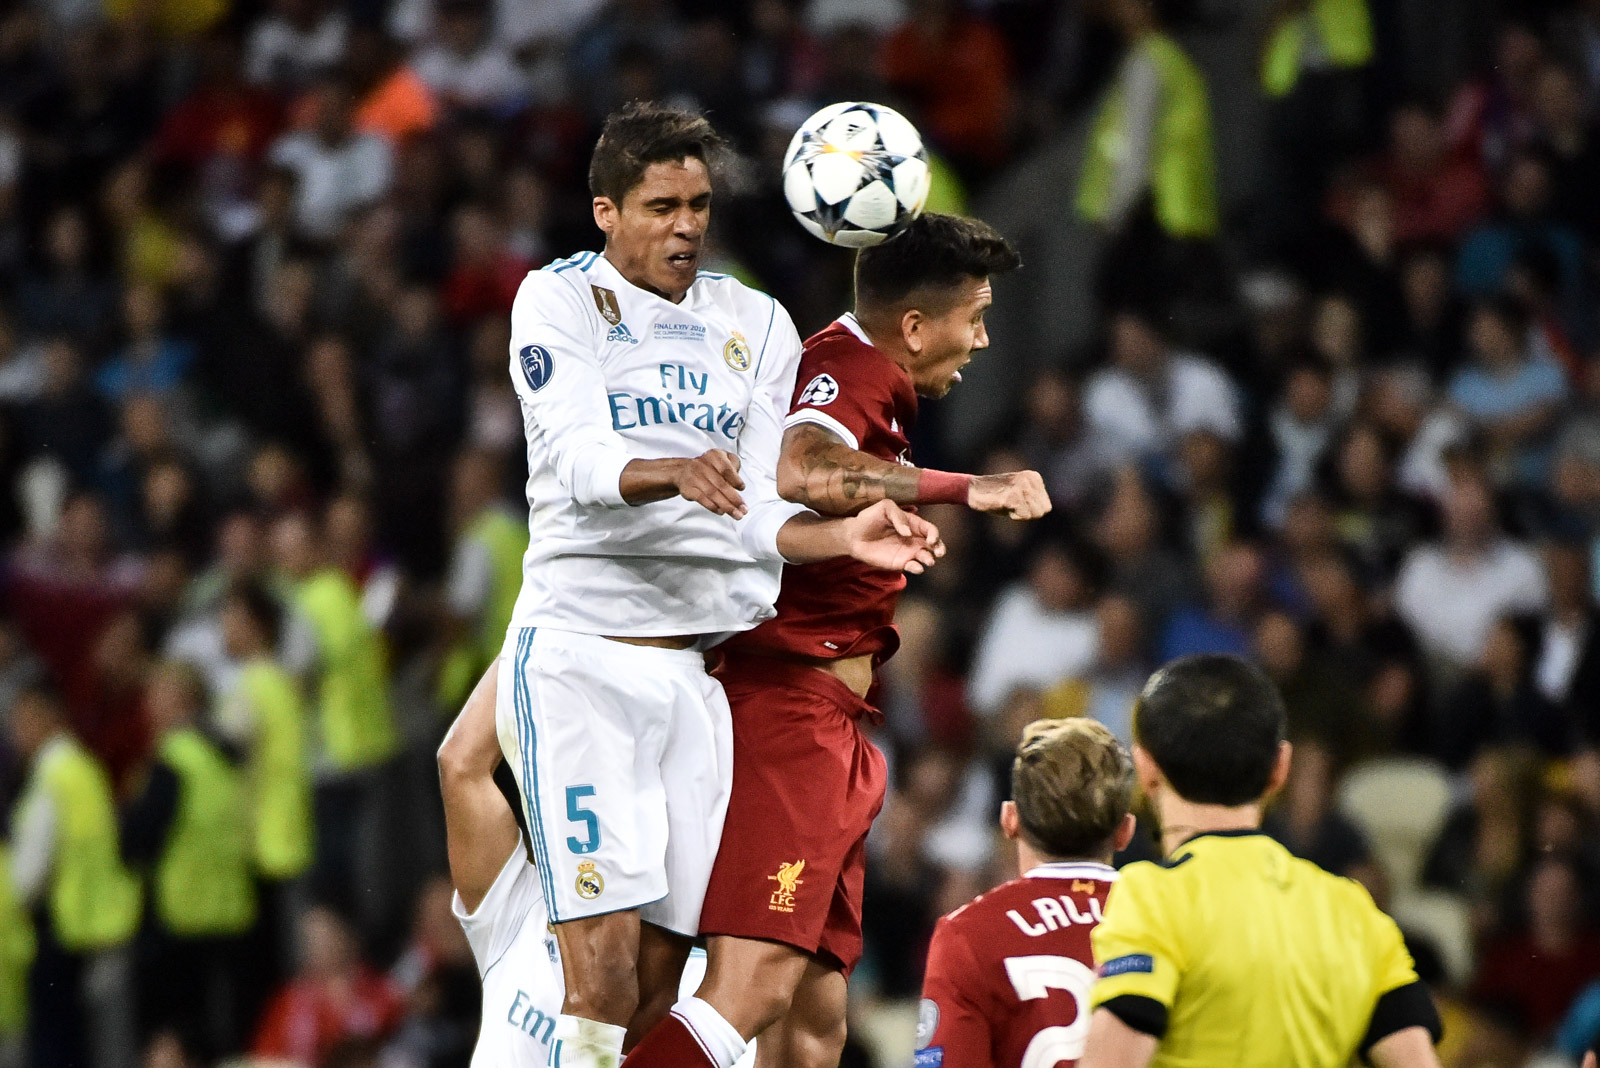 the UEFA Champions League final football match between Liverpool and Real Madrid at the Olympic Stadium on May 26 in Kyiv.